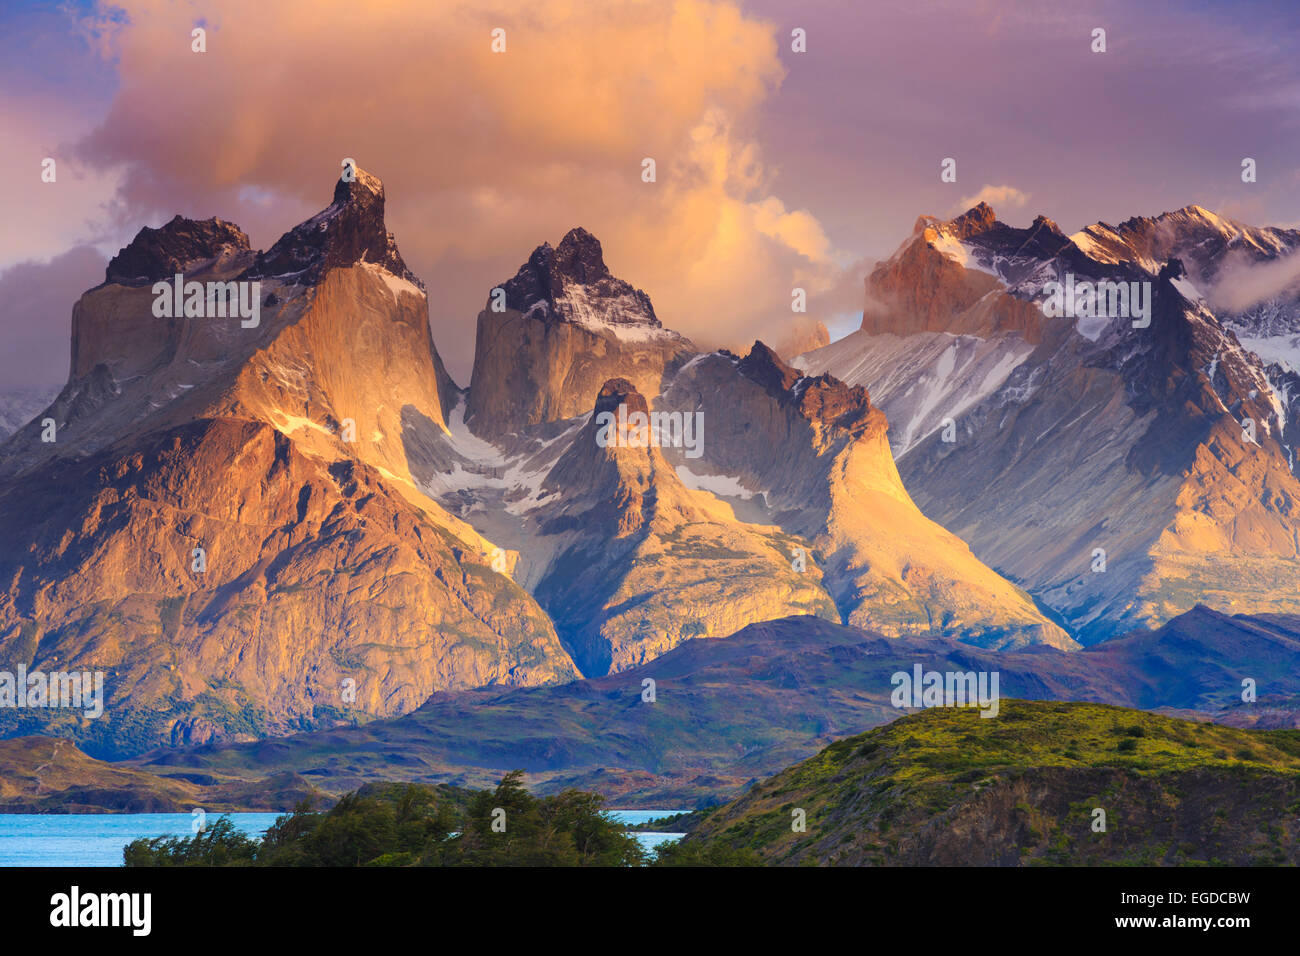 Chile, Patagonia, Torres del Paine National Park (UNESCO Site), Lake Peohe Stock Photo